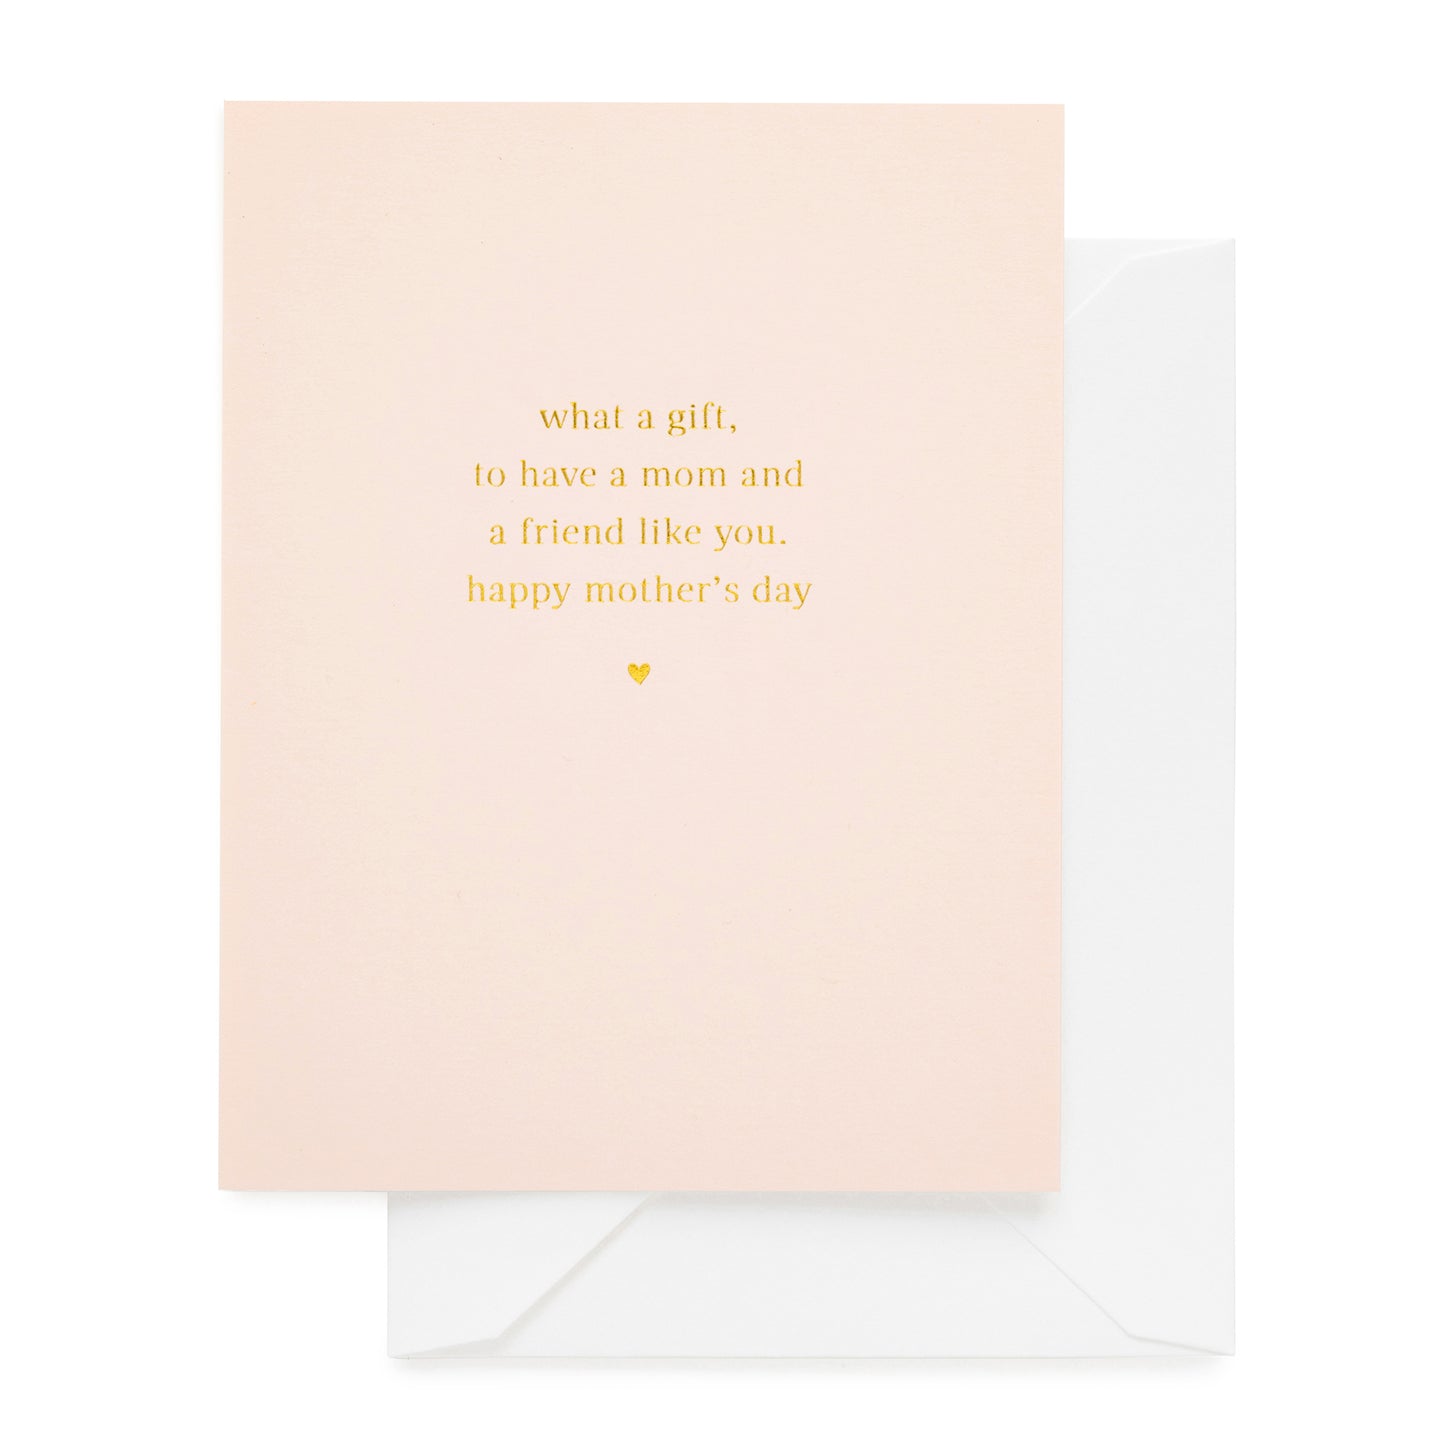 Pale pink card printed with what a gift to have a mom and friend like you happy mother's day